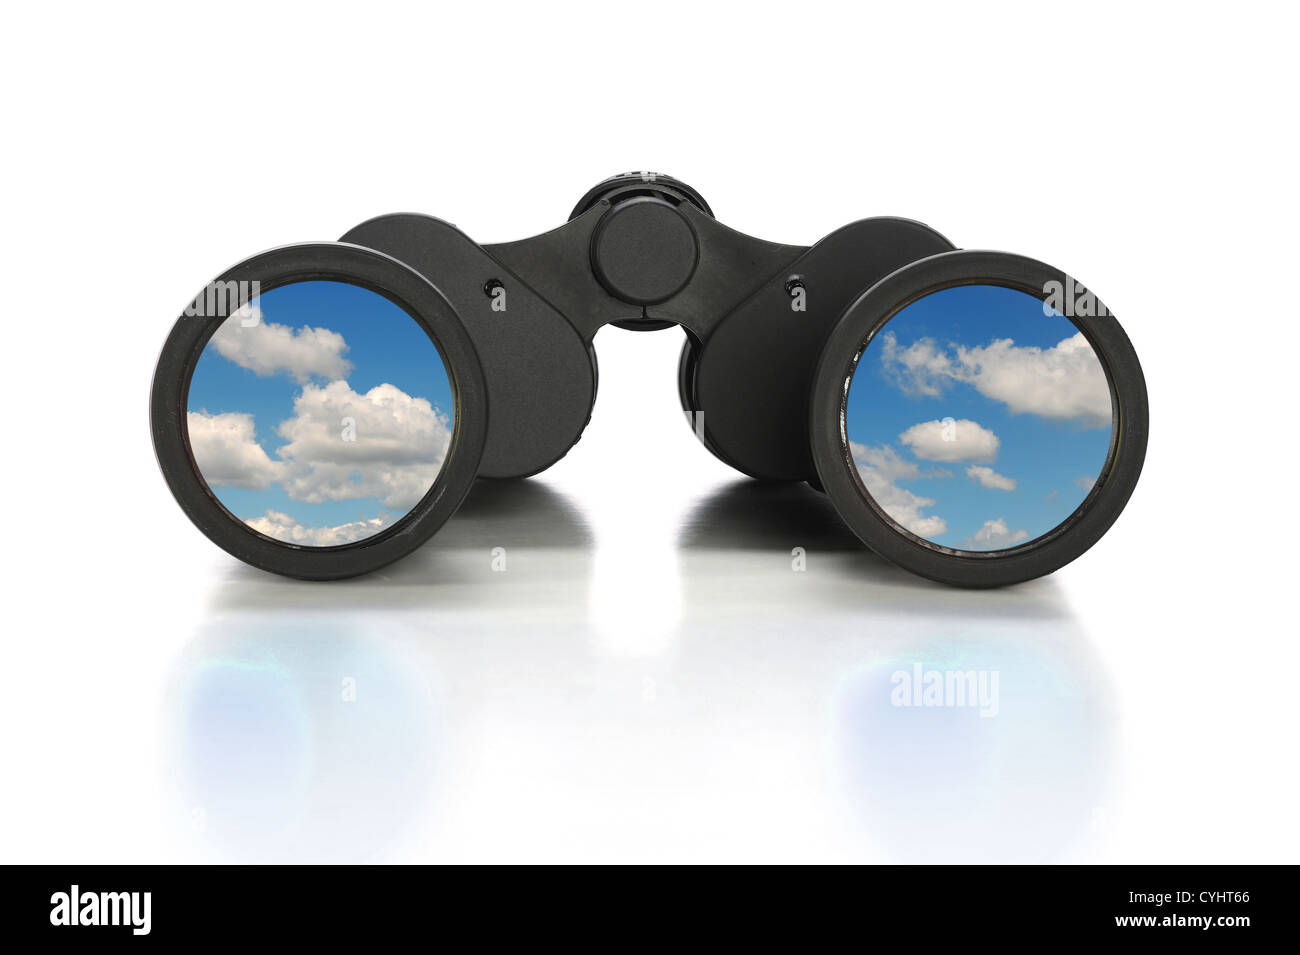 Binoculars with image of clouds over reflective table Stock Photo